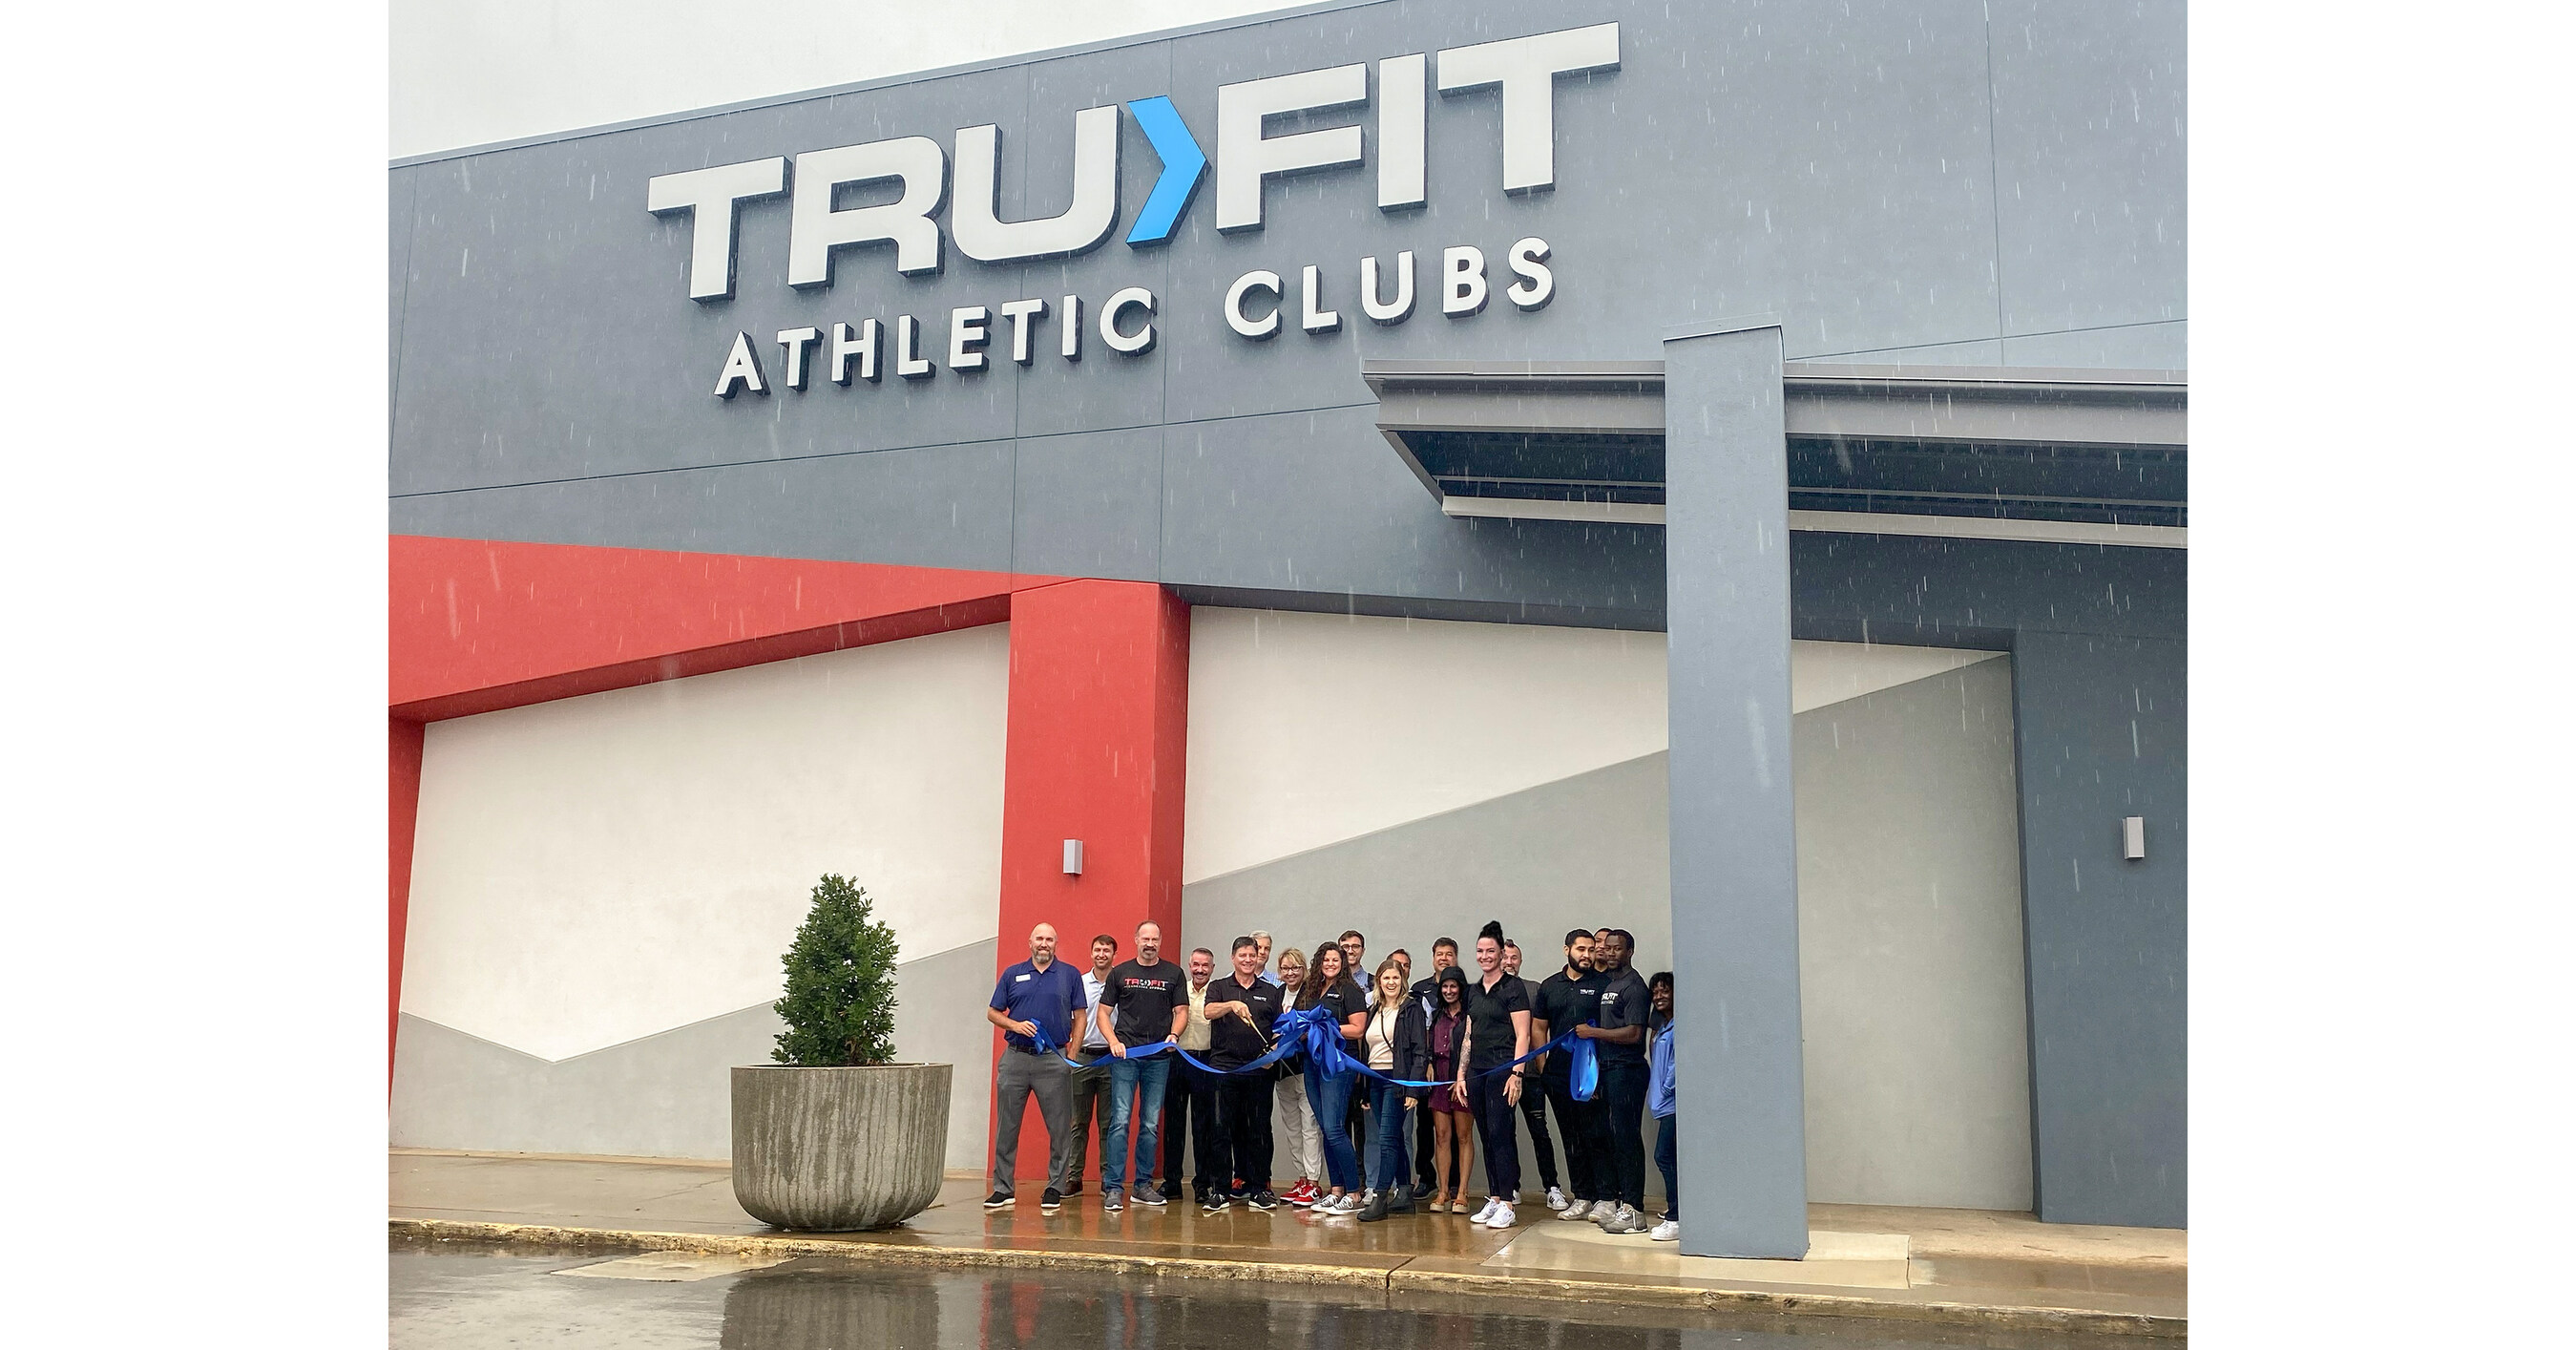 TEXAS FITNESS GIANT, TRUFIT ATHLETIC CLUBS, TAKES TENNESSEE